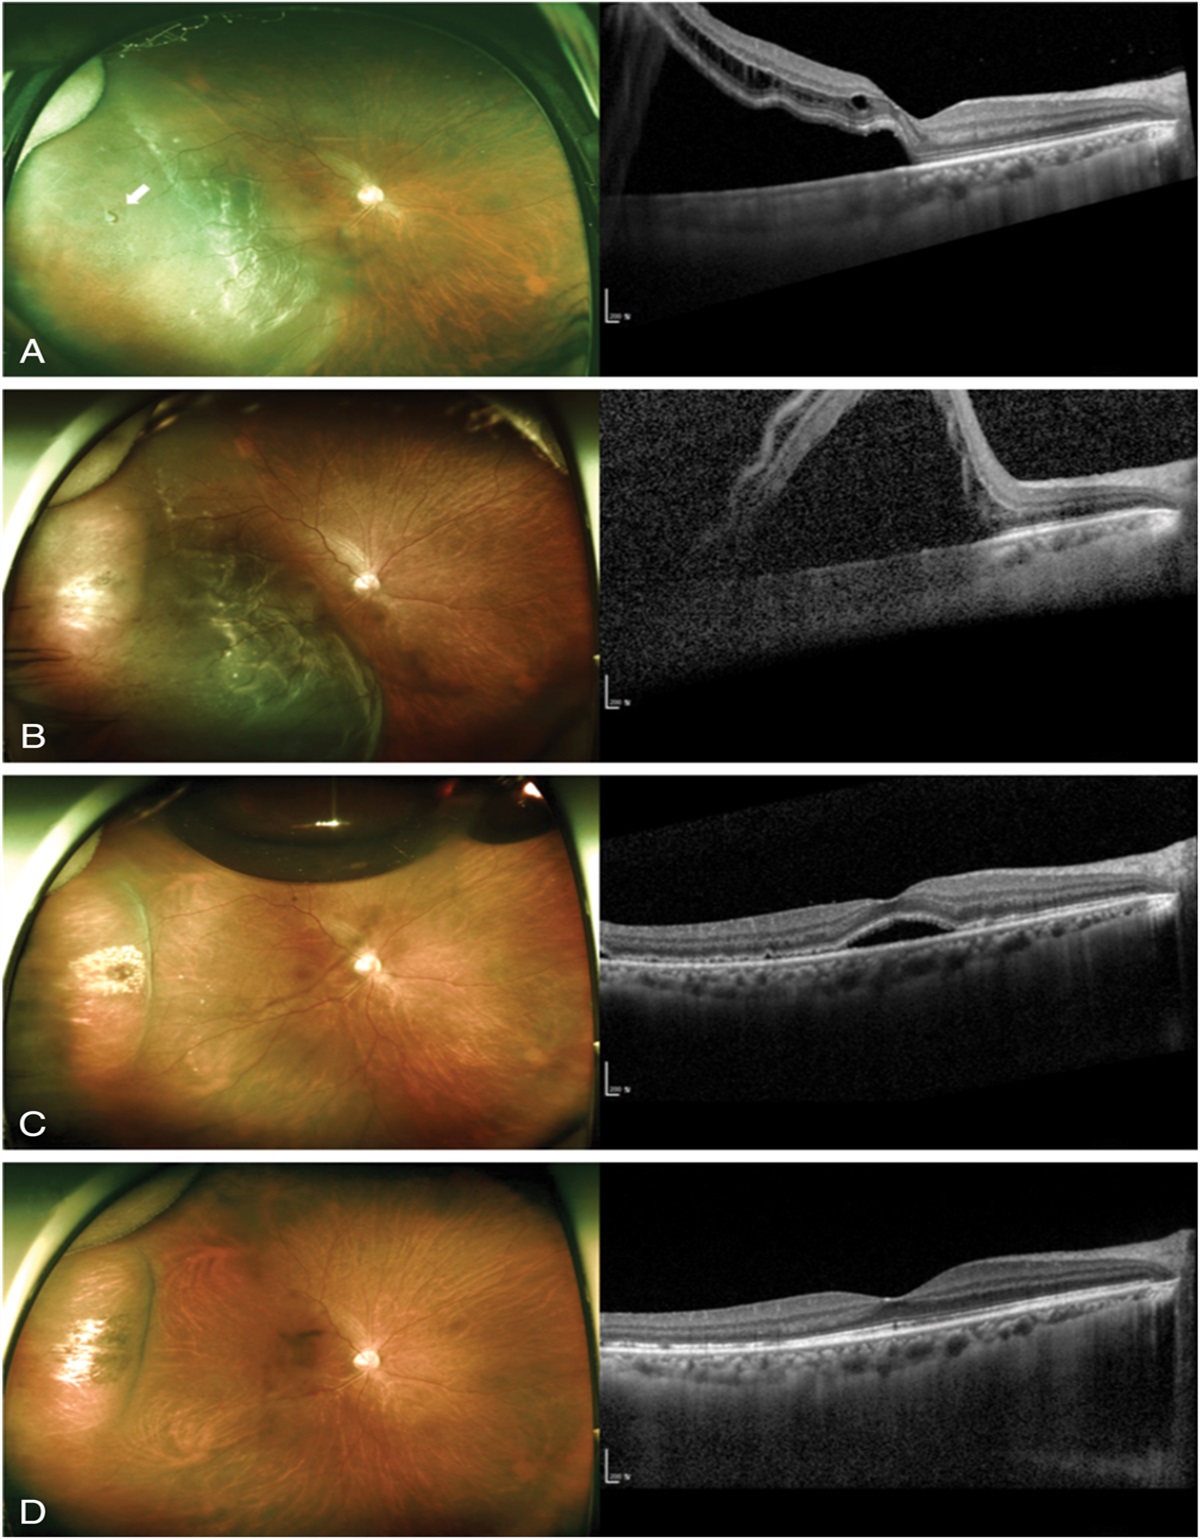 ADDITIONAL PNEUMATIC RETINOPEXY IN PATIENTS WITH PERSISTENT RETINAL DETACHMENT AFTER SCLERAL BUCKLING